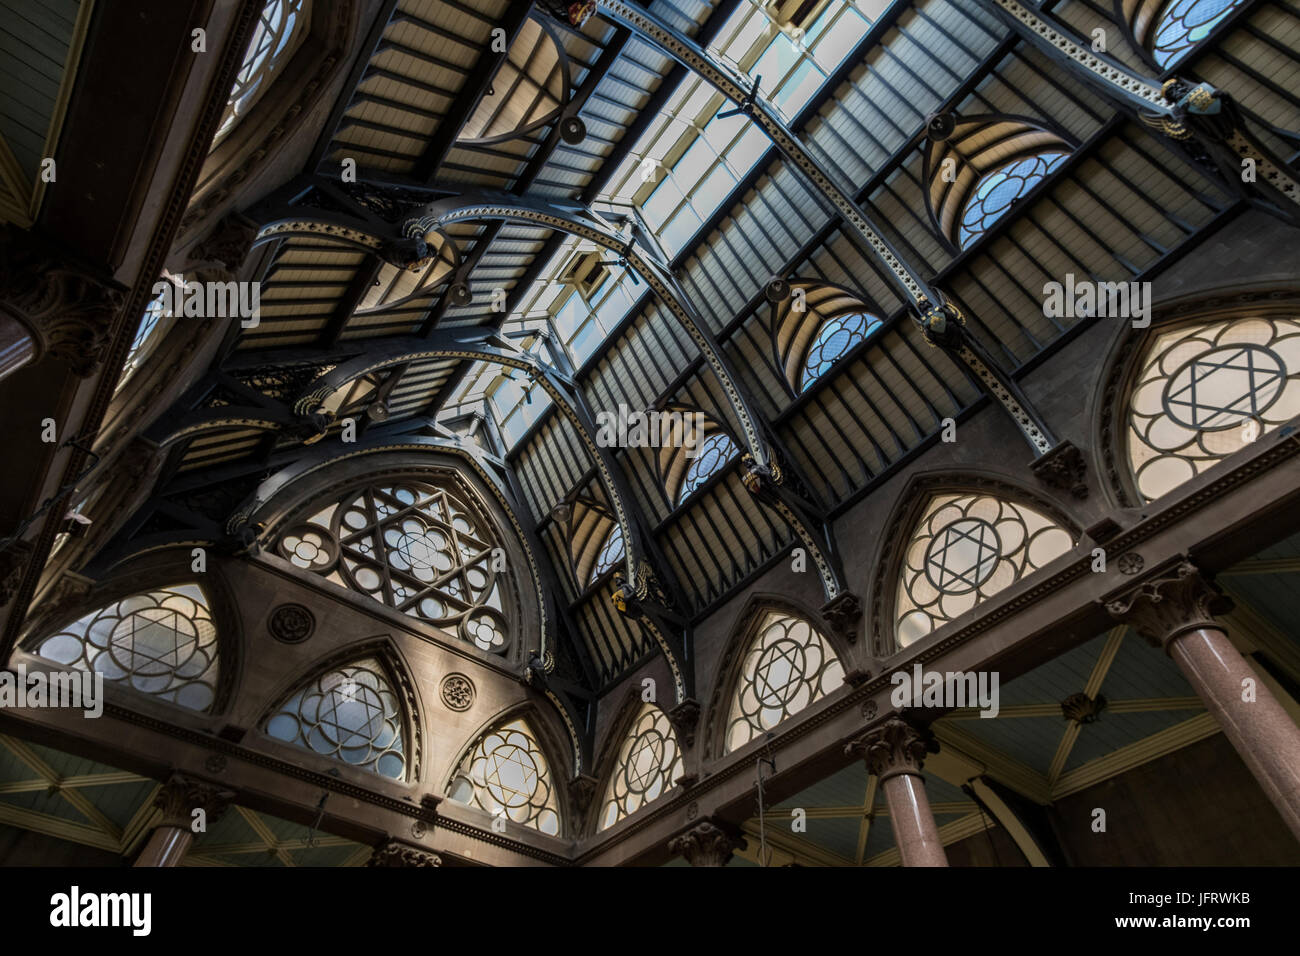 The fabulously ornate Wool Exchange building in the heart of Bradford City Centre, West Yorkshire, UK, now the home of Waterstone's book shop. Stock Photo